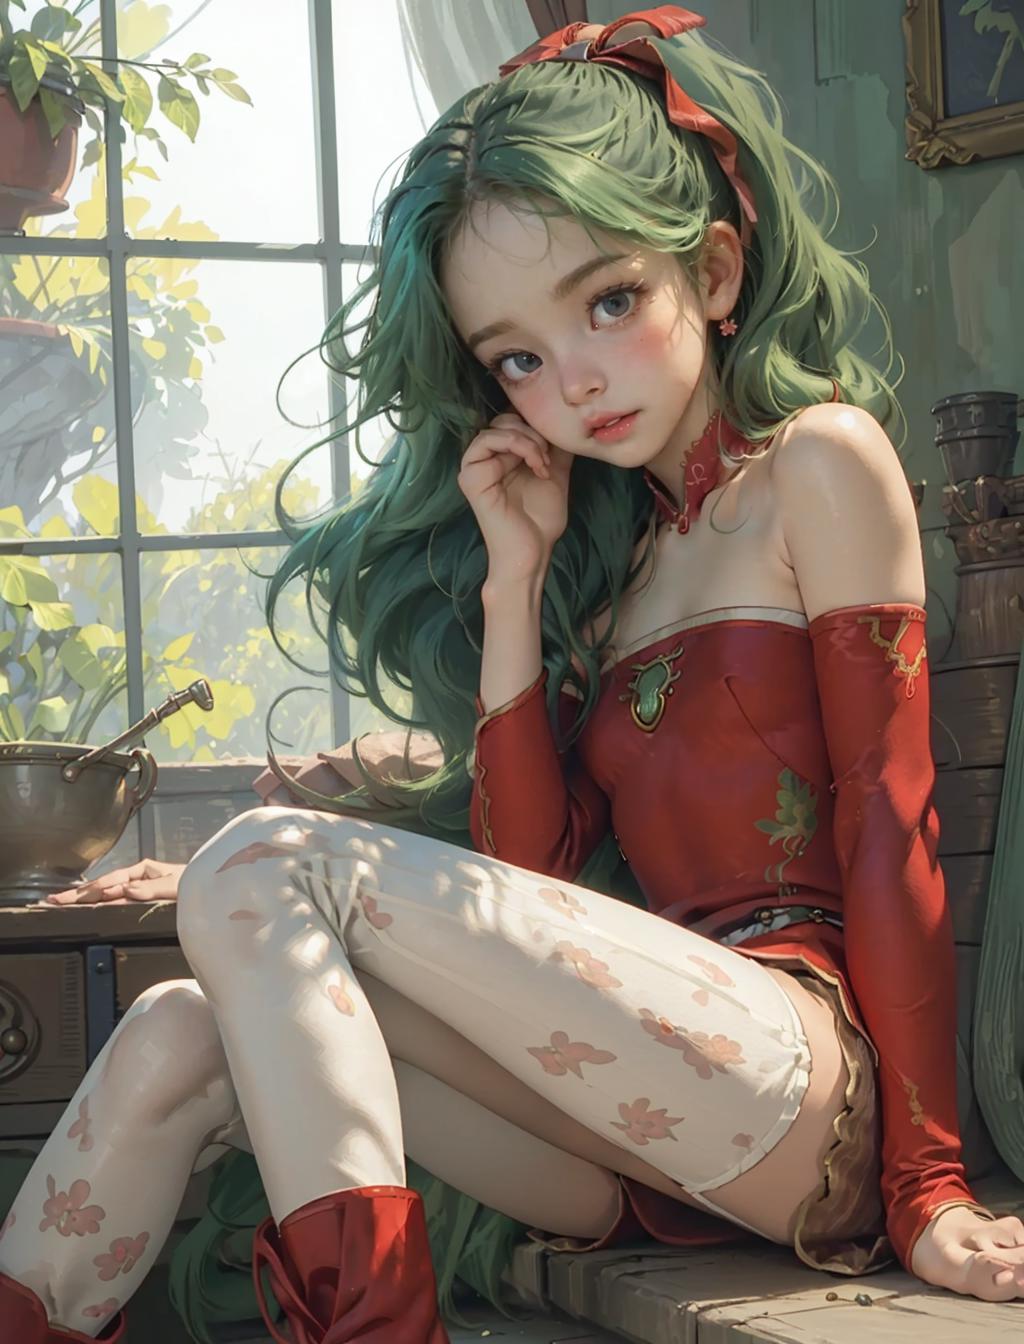 Anime-style illustration of a green-haired woman with flower-patterned stockings.